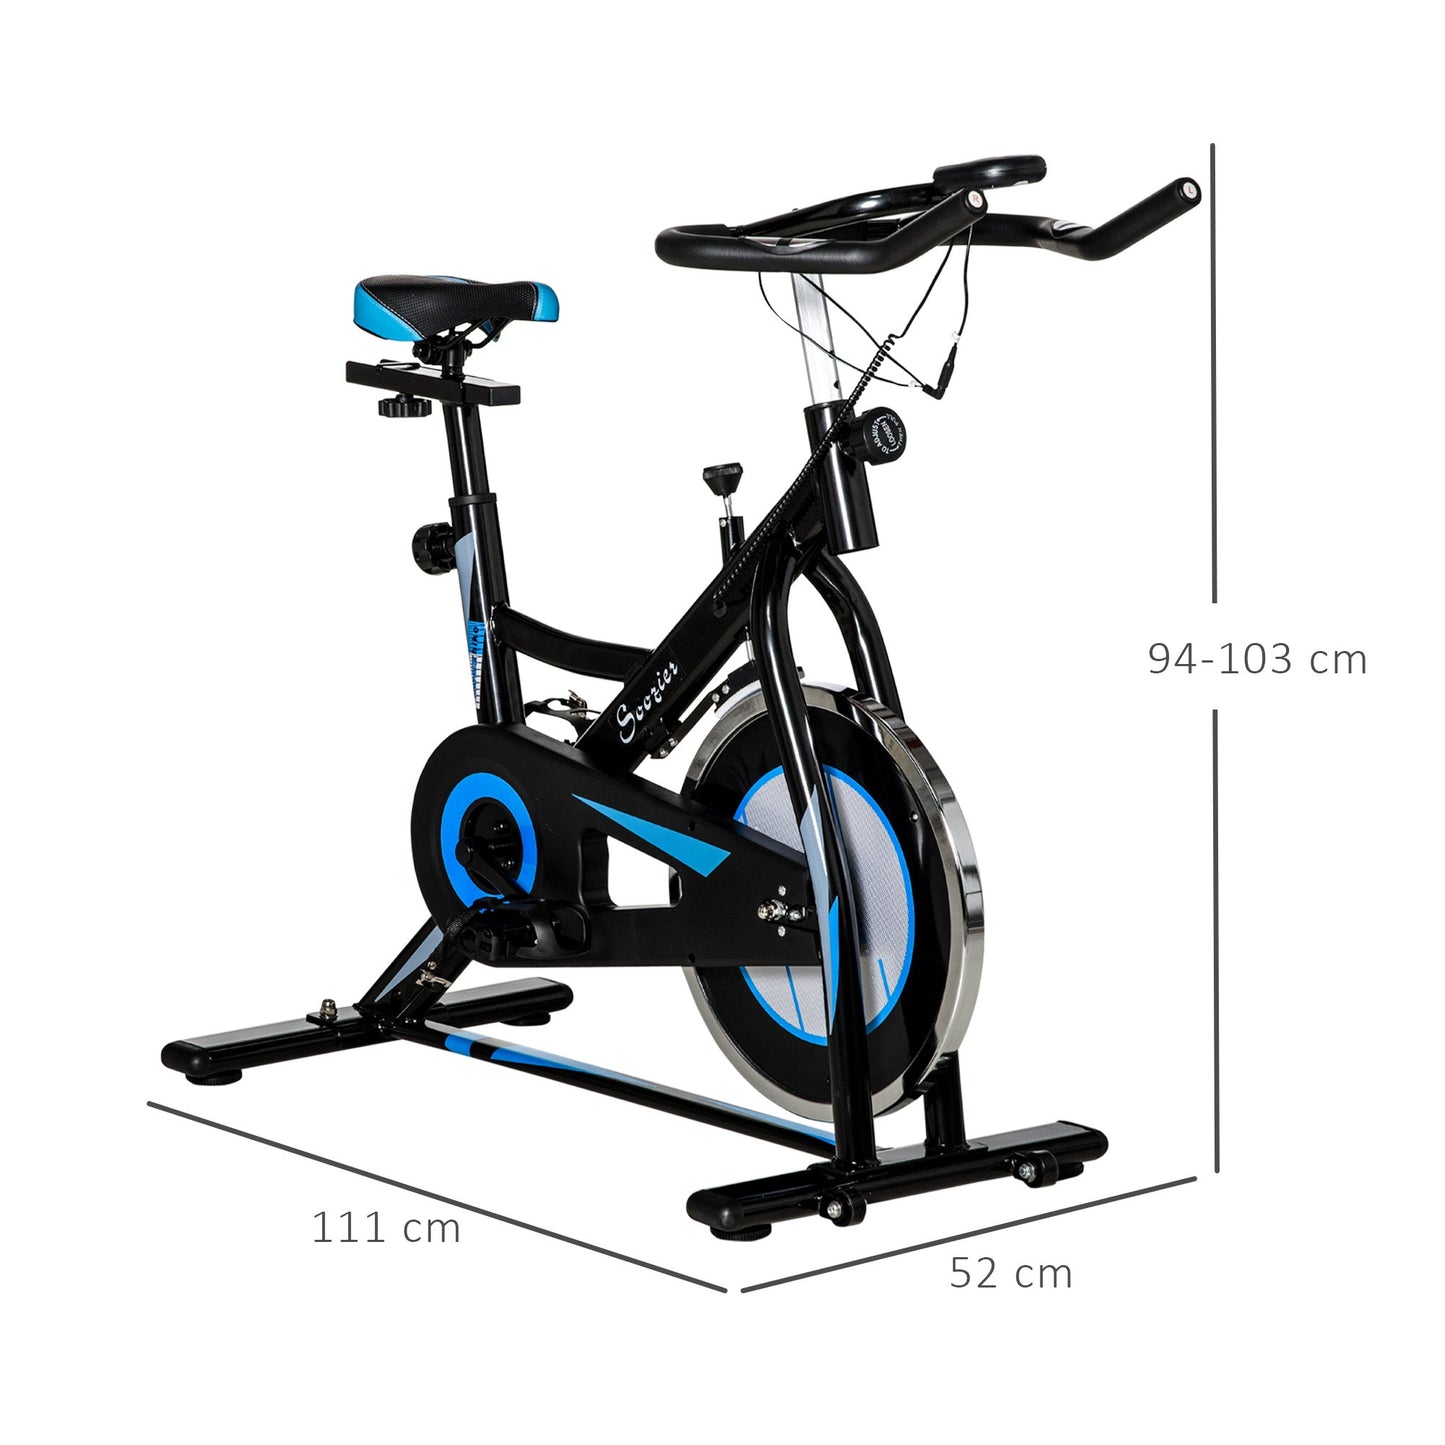 HOMCOM Stationary Exercise Bike, 8kg Flywheel Indoor Cycling Workout Fitness Bike, Adjustable Resistance Cardio Exercise Machine w/ LCD Monitor Pad and Phone Holder for Home, Gym, Office, Black